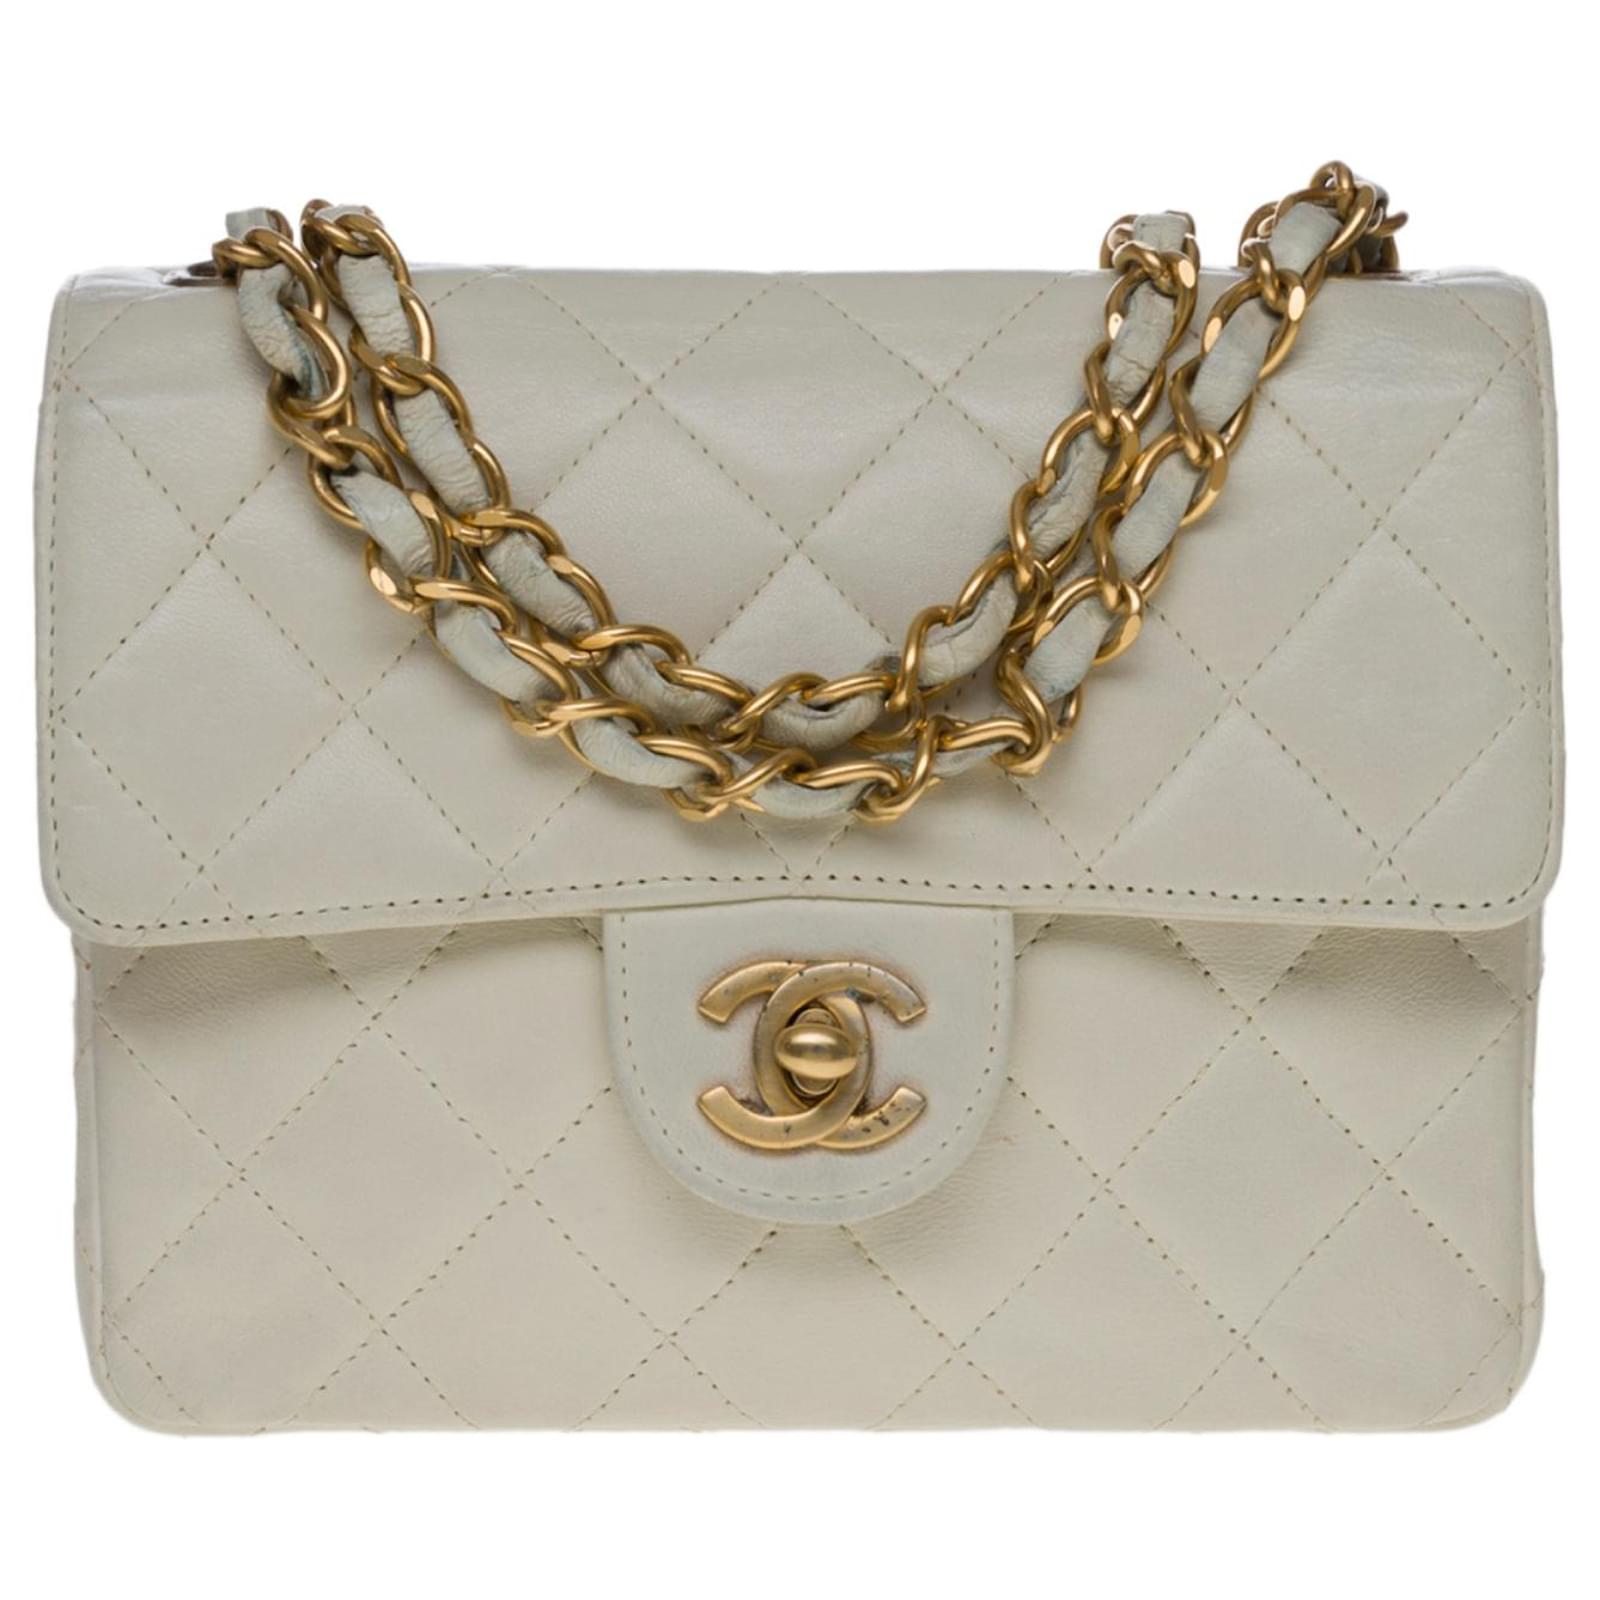 CHANEL Caviar Quilted Timeless Clutch White 205256